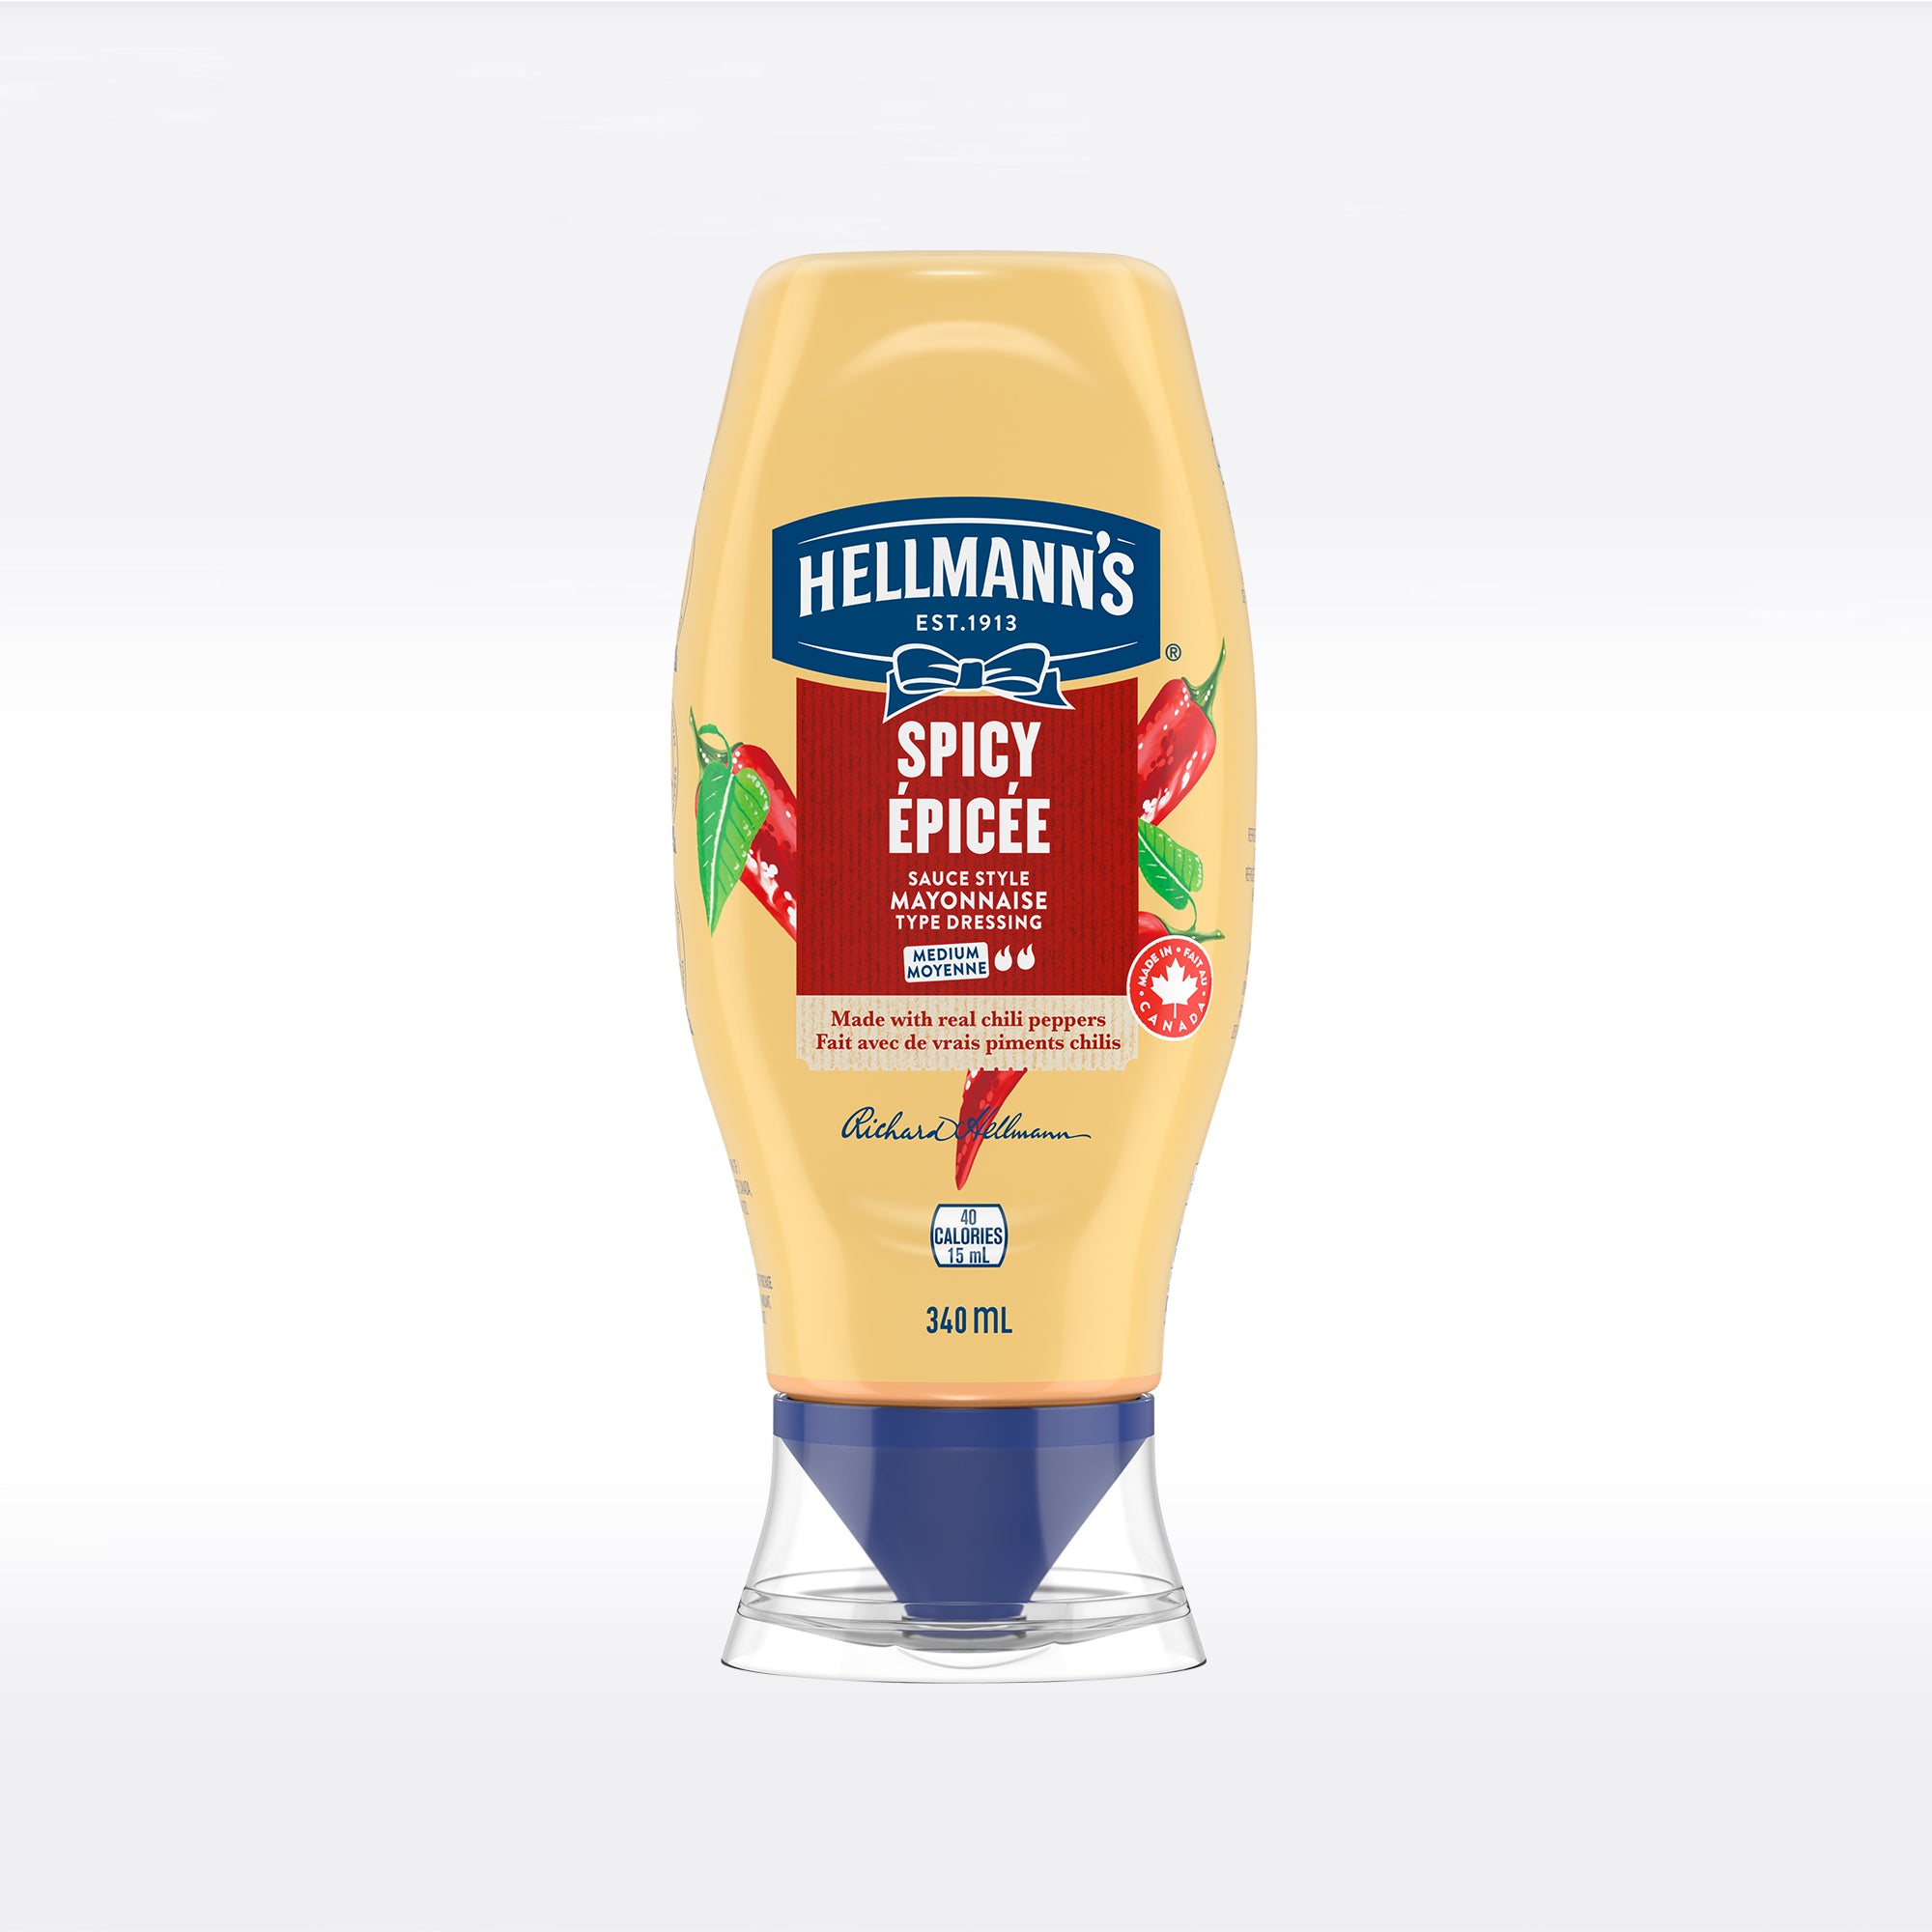 Hellmann's Spicy Mayonnaise real Sriracha chili peppers 340ml